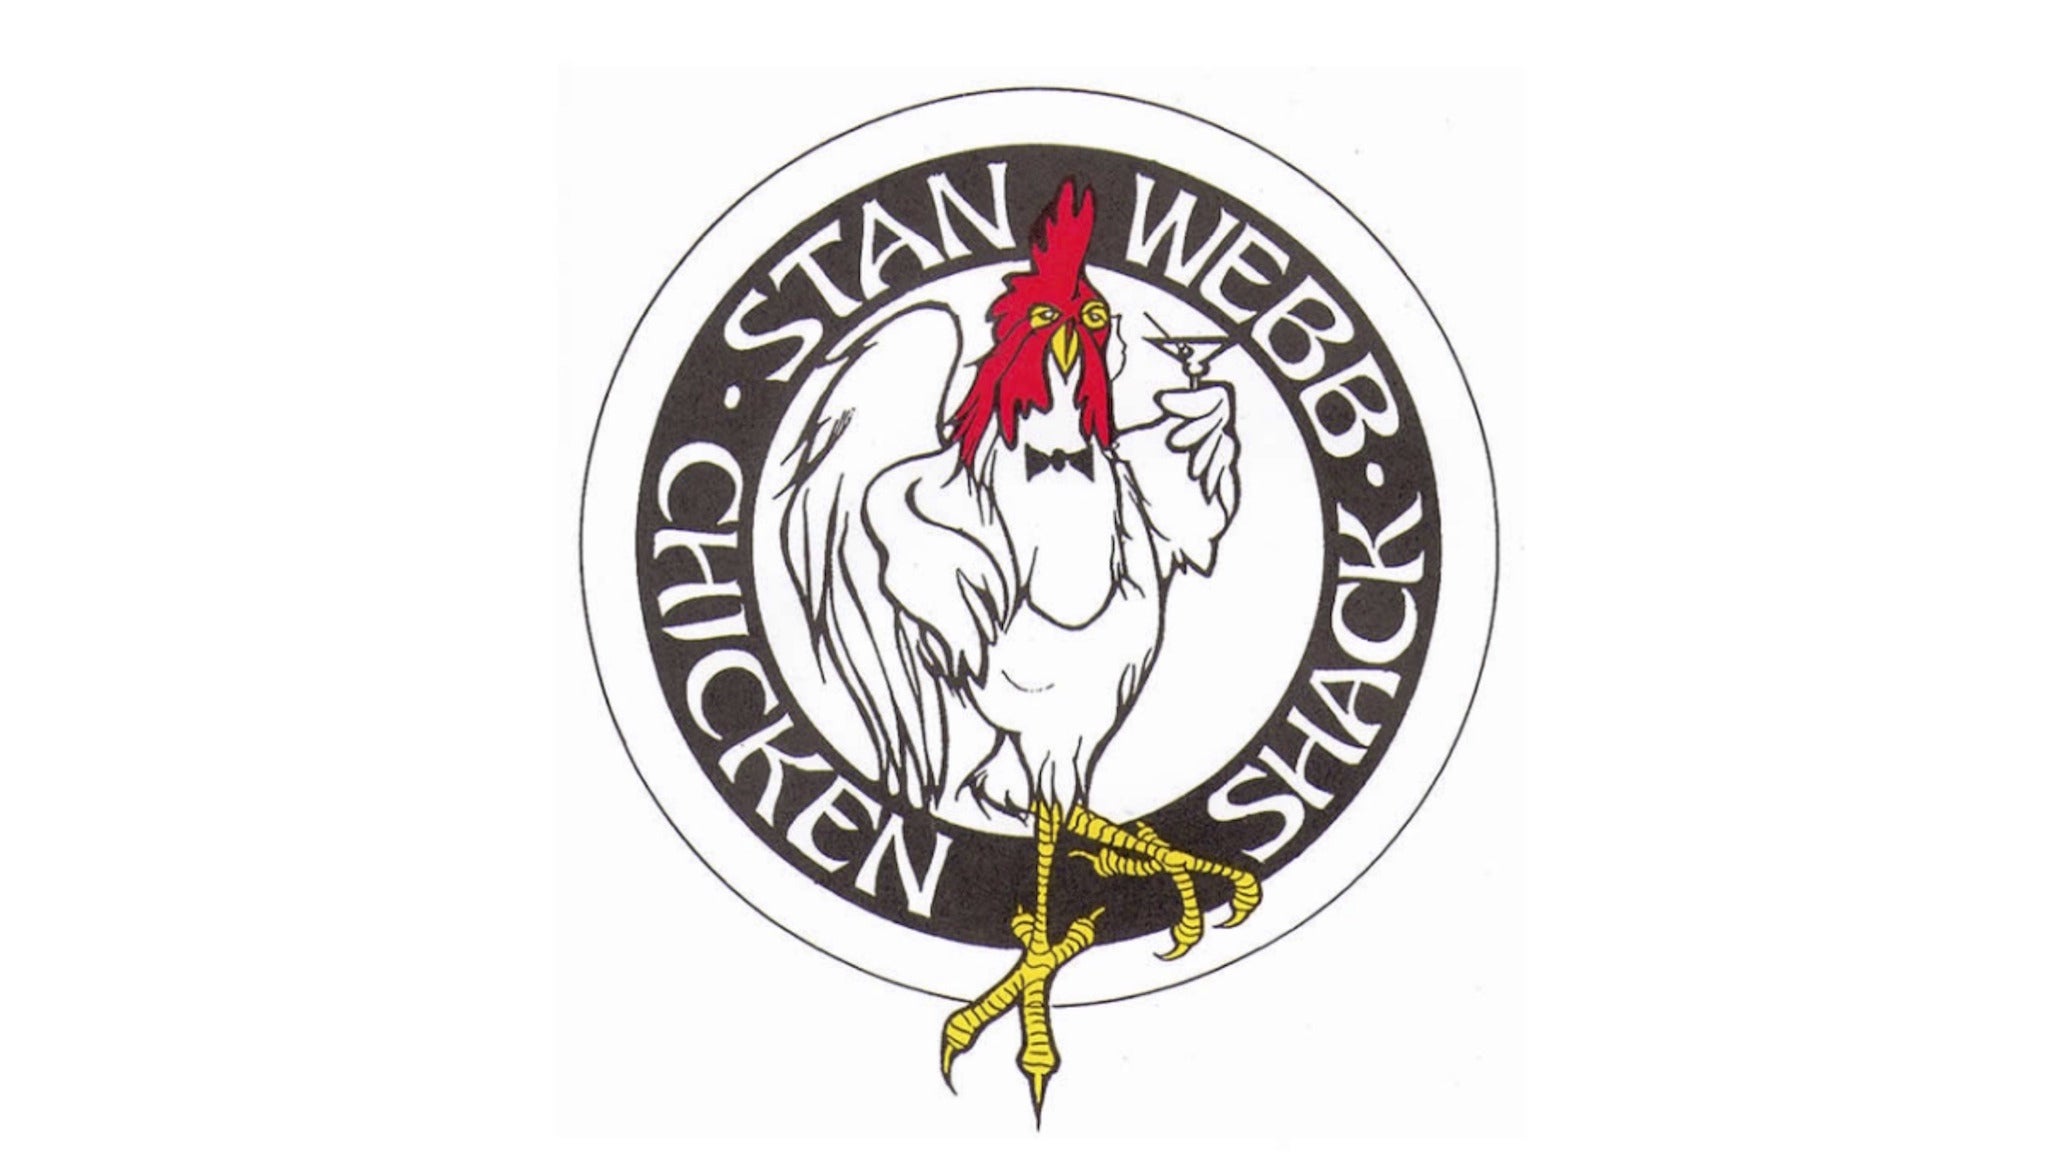 Stan Webb's Chicken Shack Event Title Pic